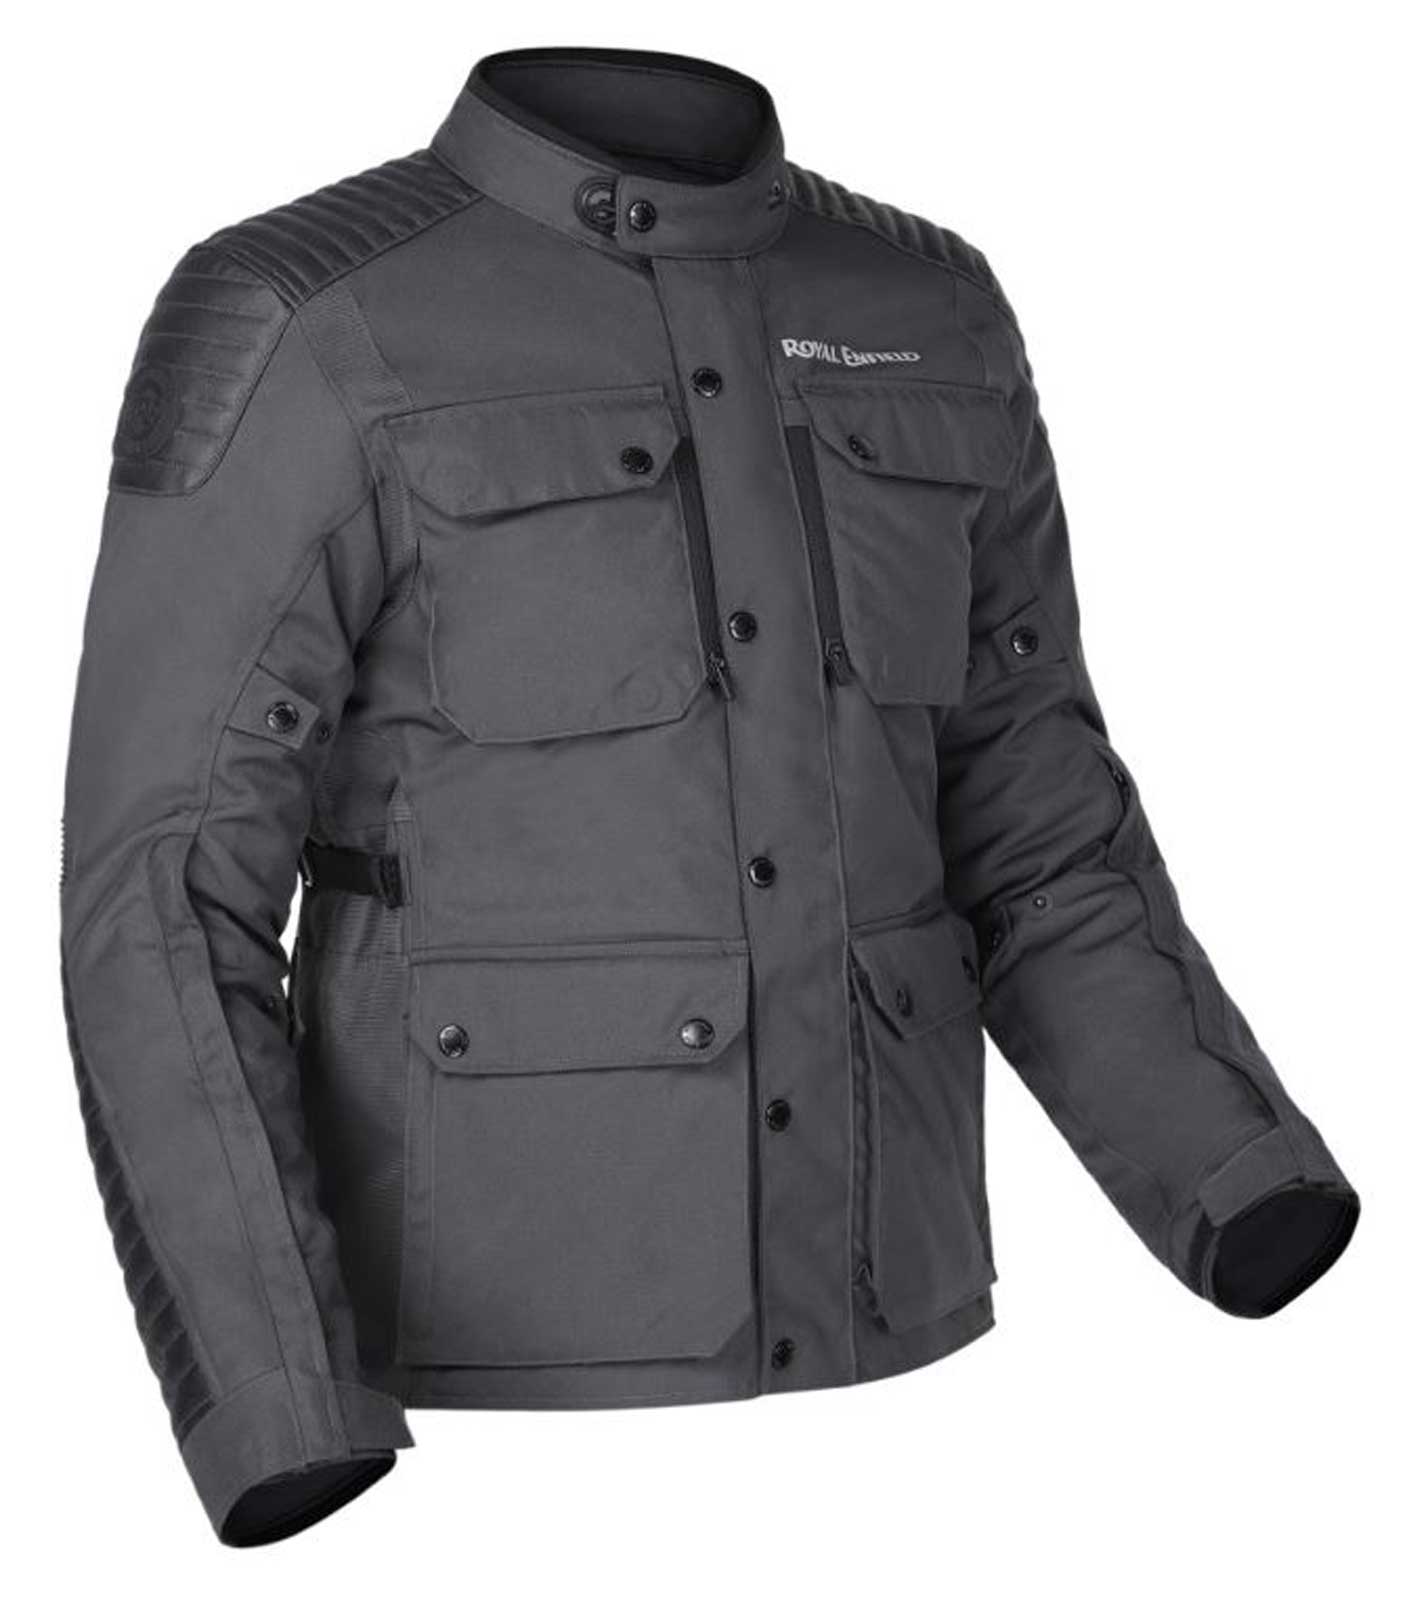 Royal Enfield Streetwind Eco riding jacket review: Making everyday rides  greener - Times of India